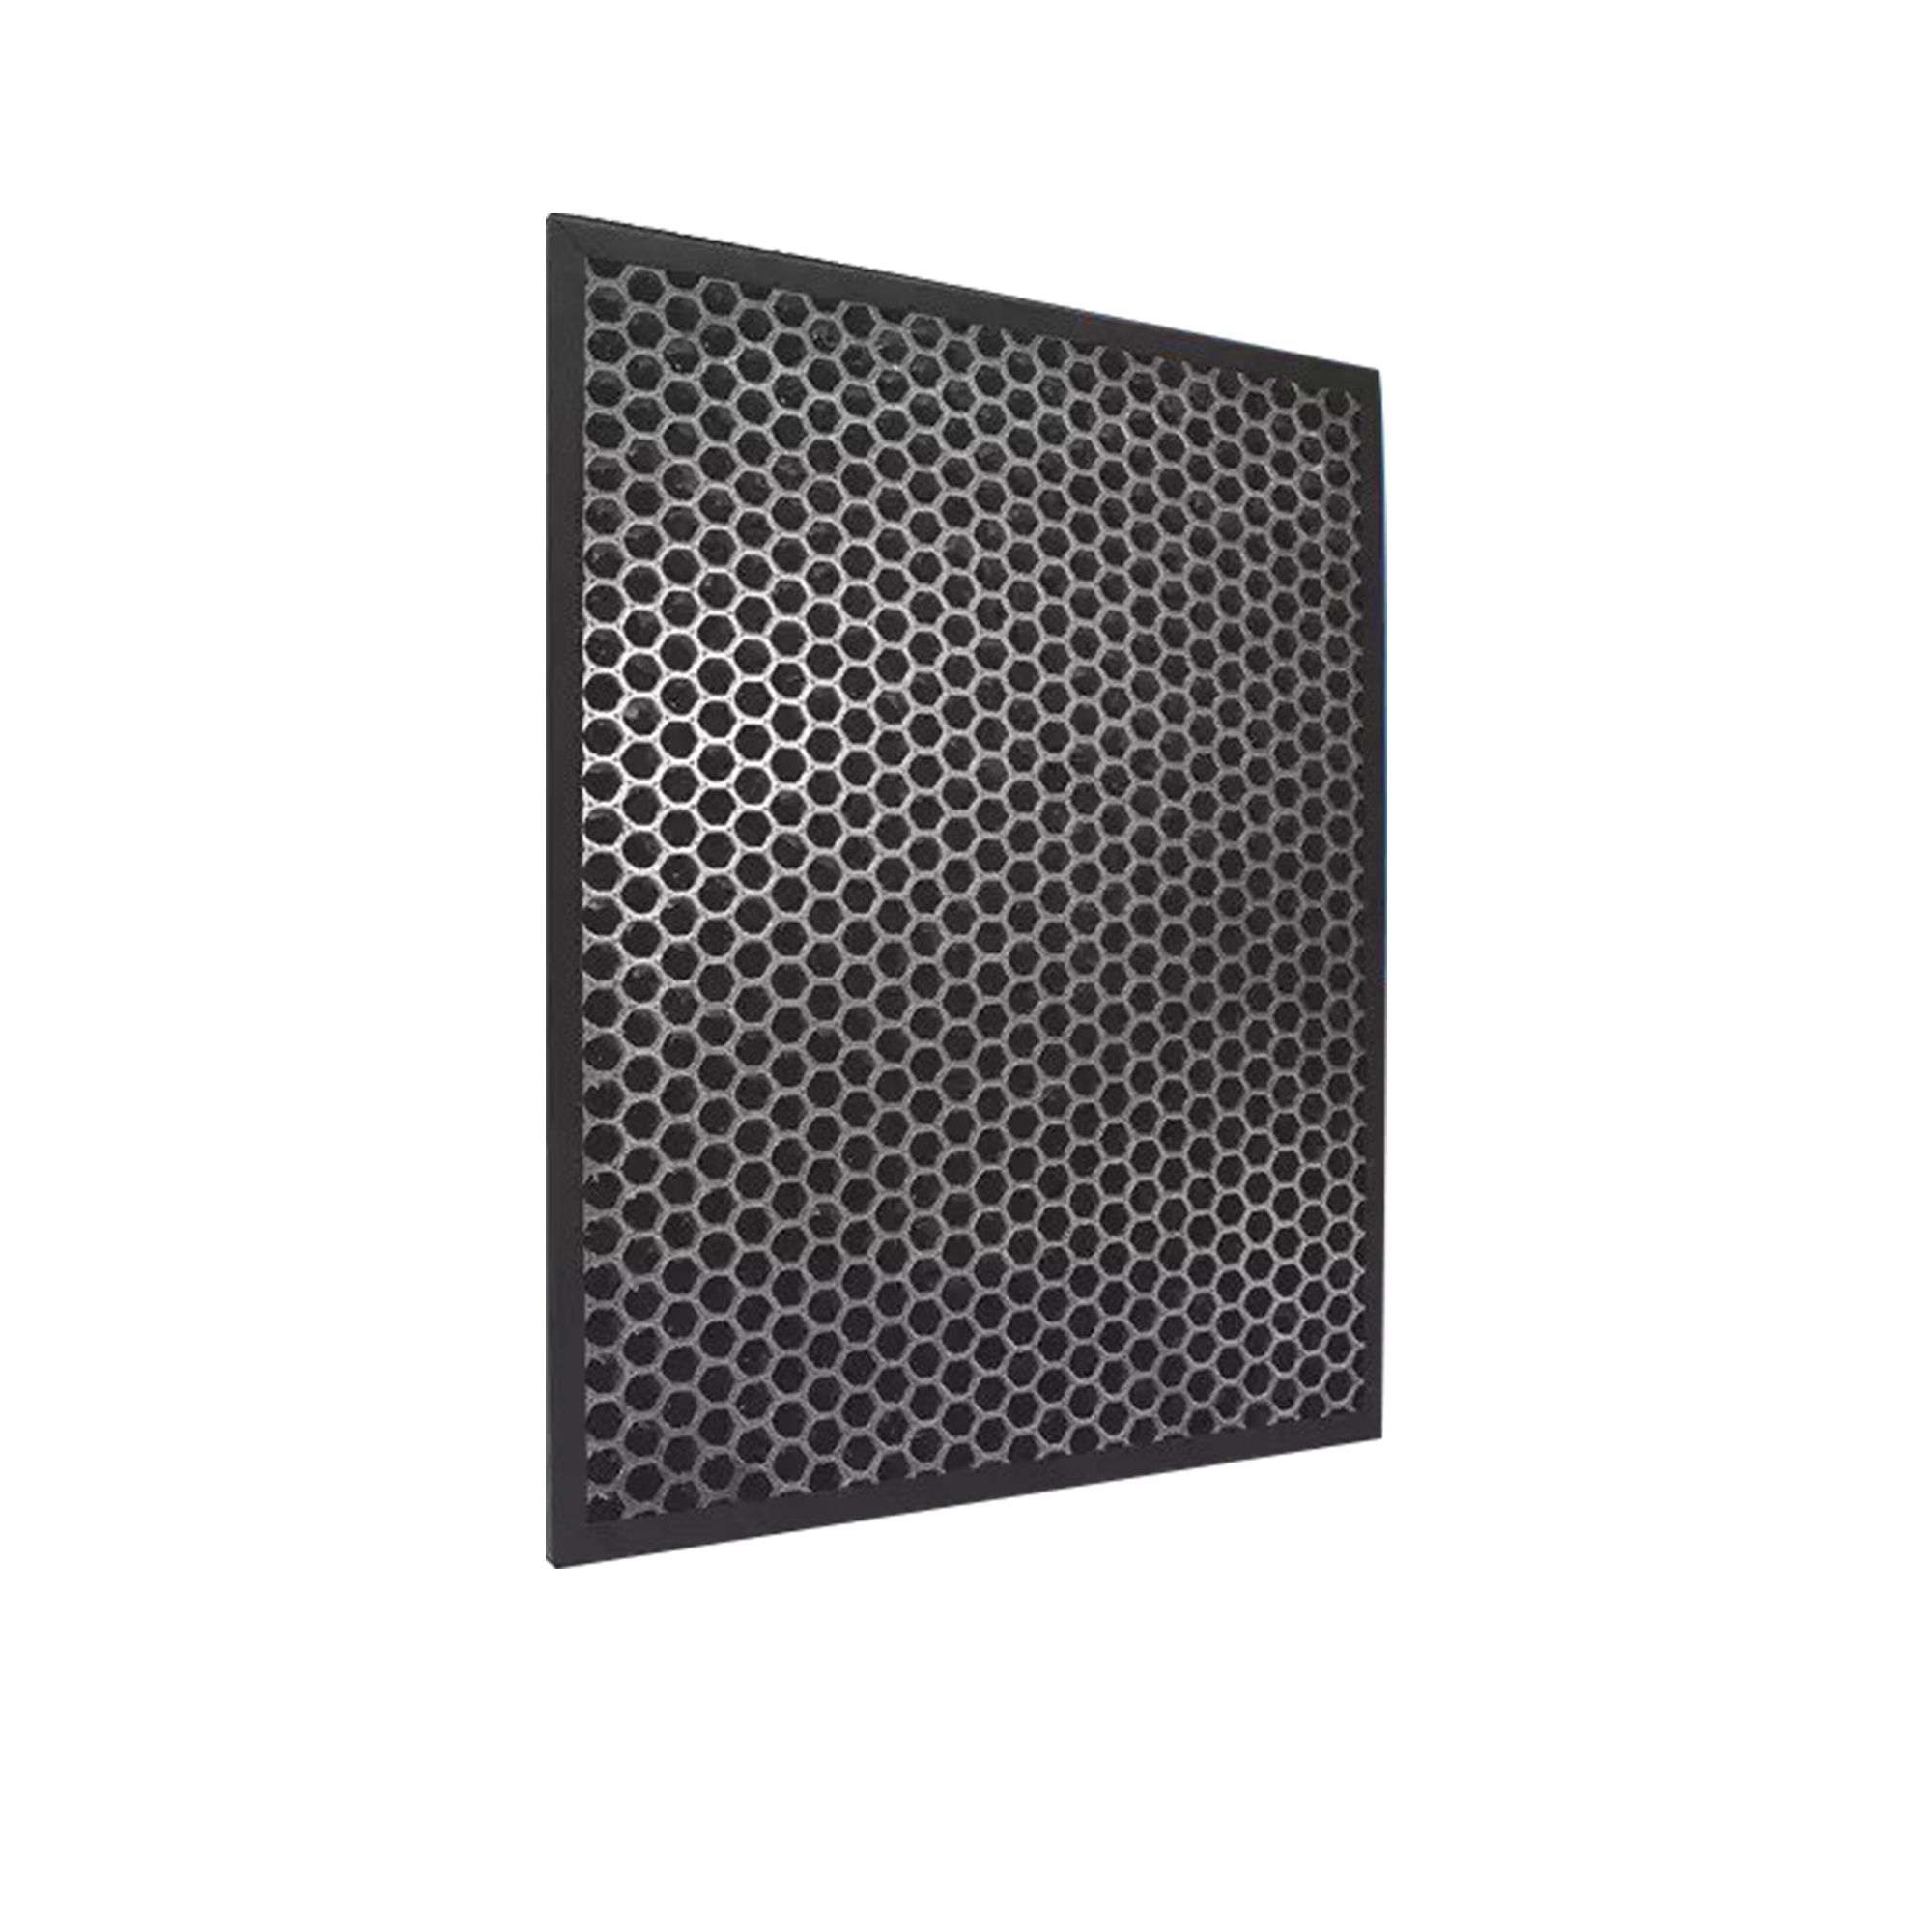 Philips NanoProtect 2000 Series AC Filter Replacement for AC2887/70 Image 1